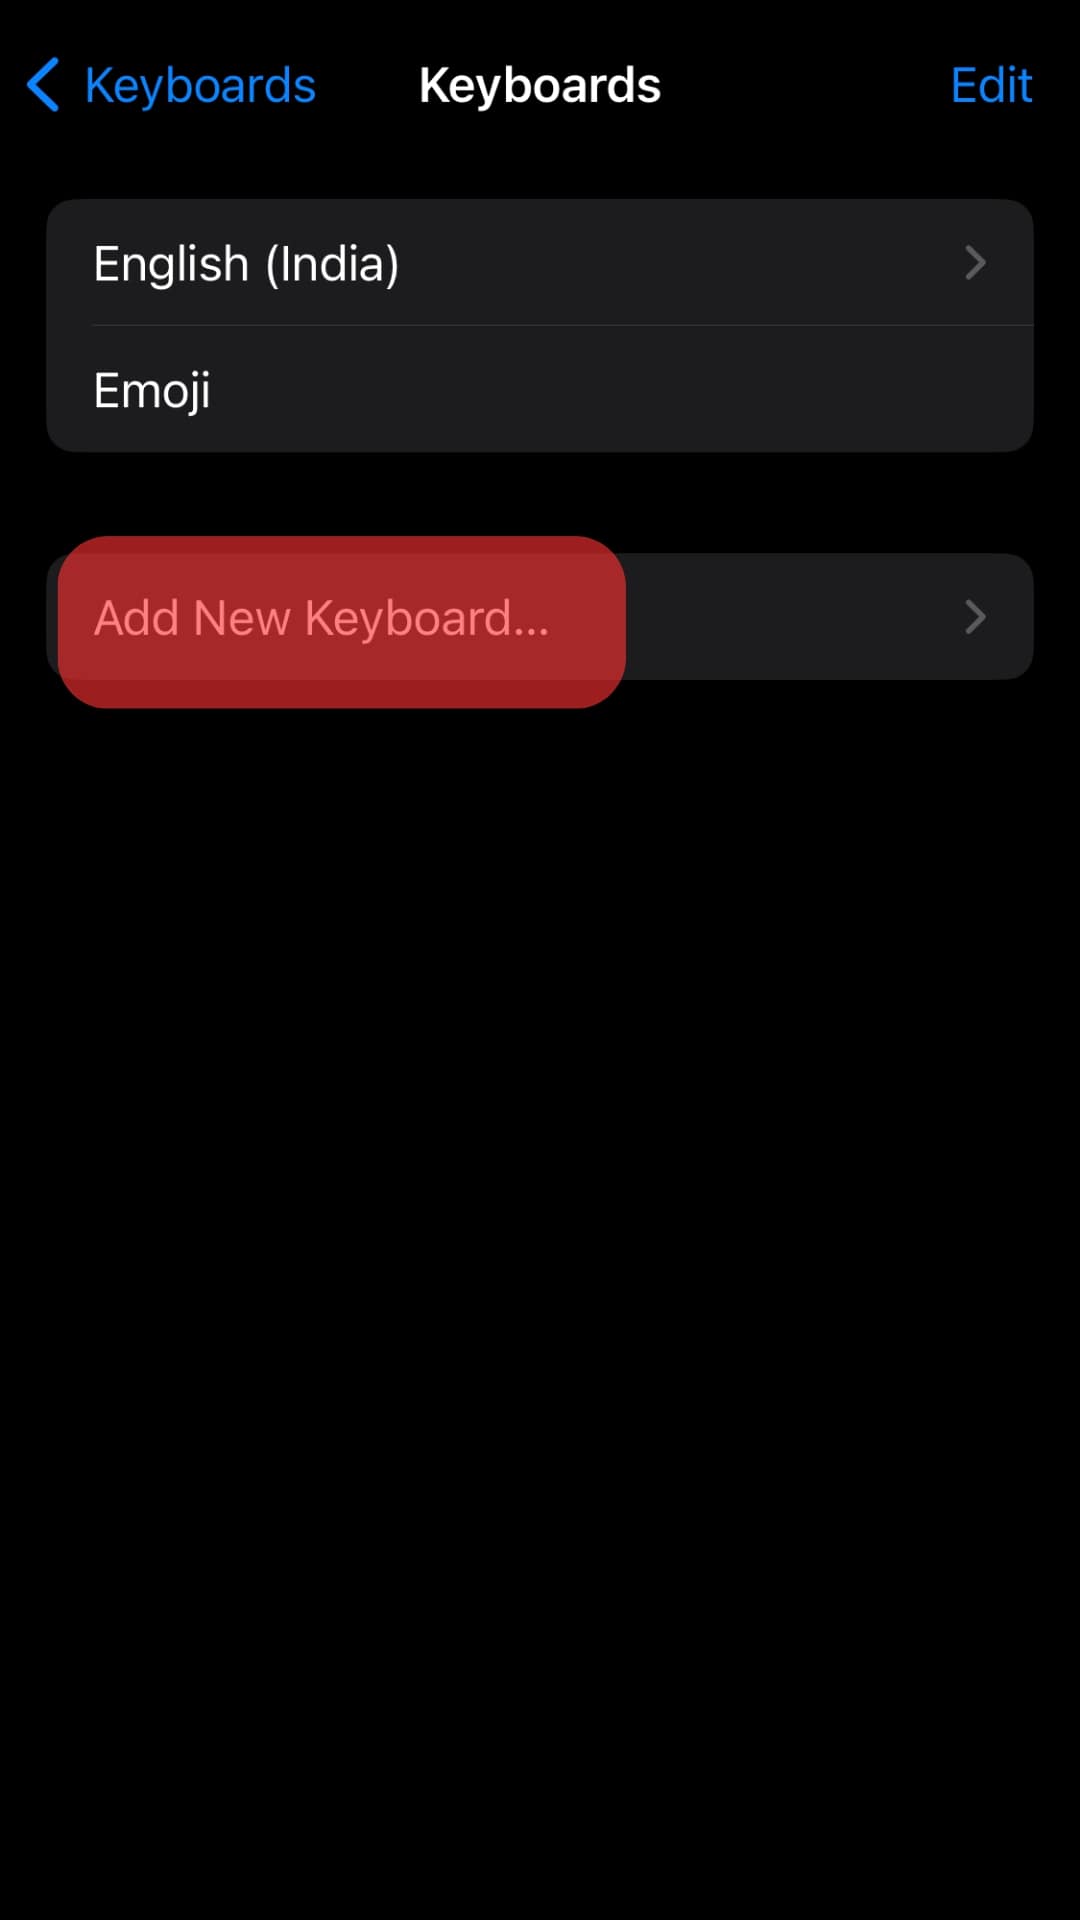 Find The Option For Add New Keyboard